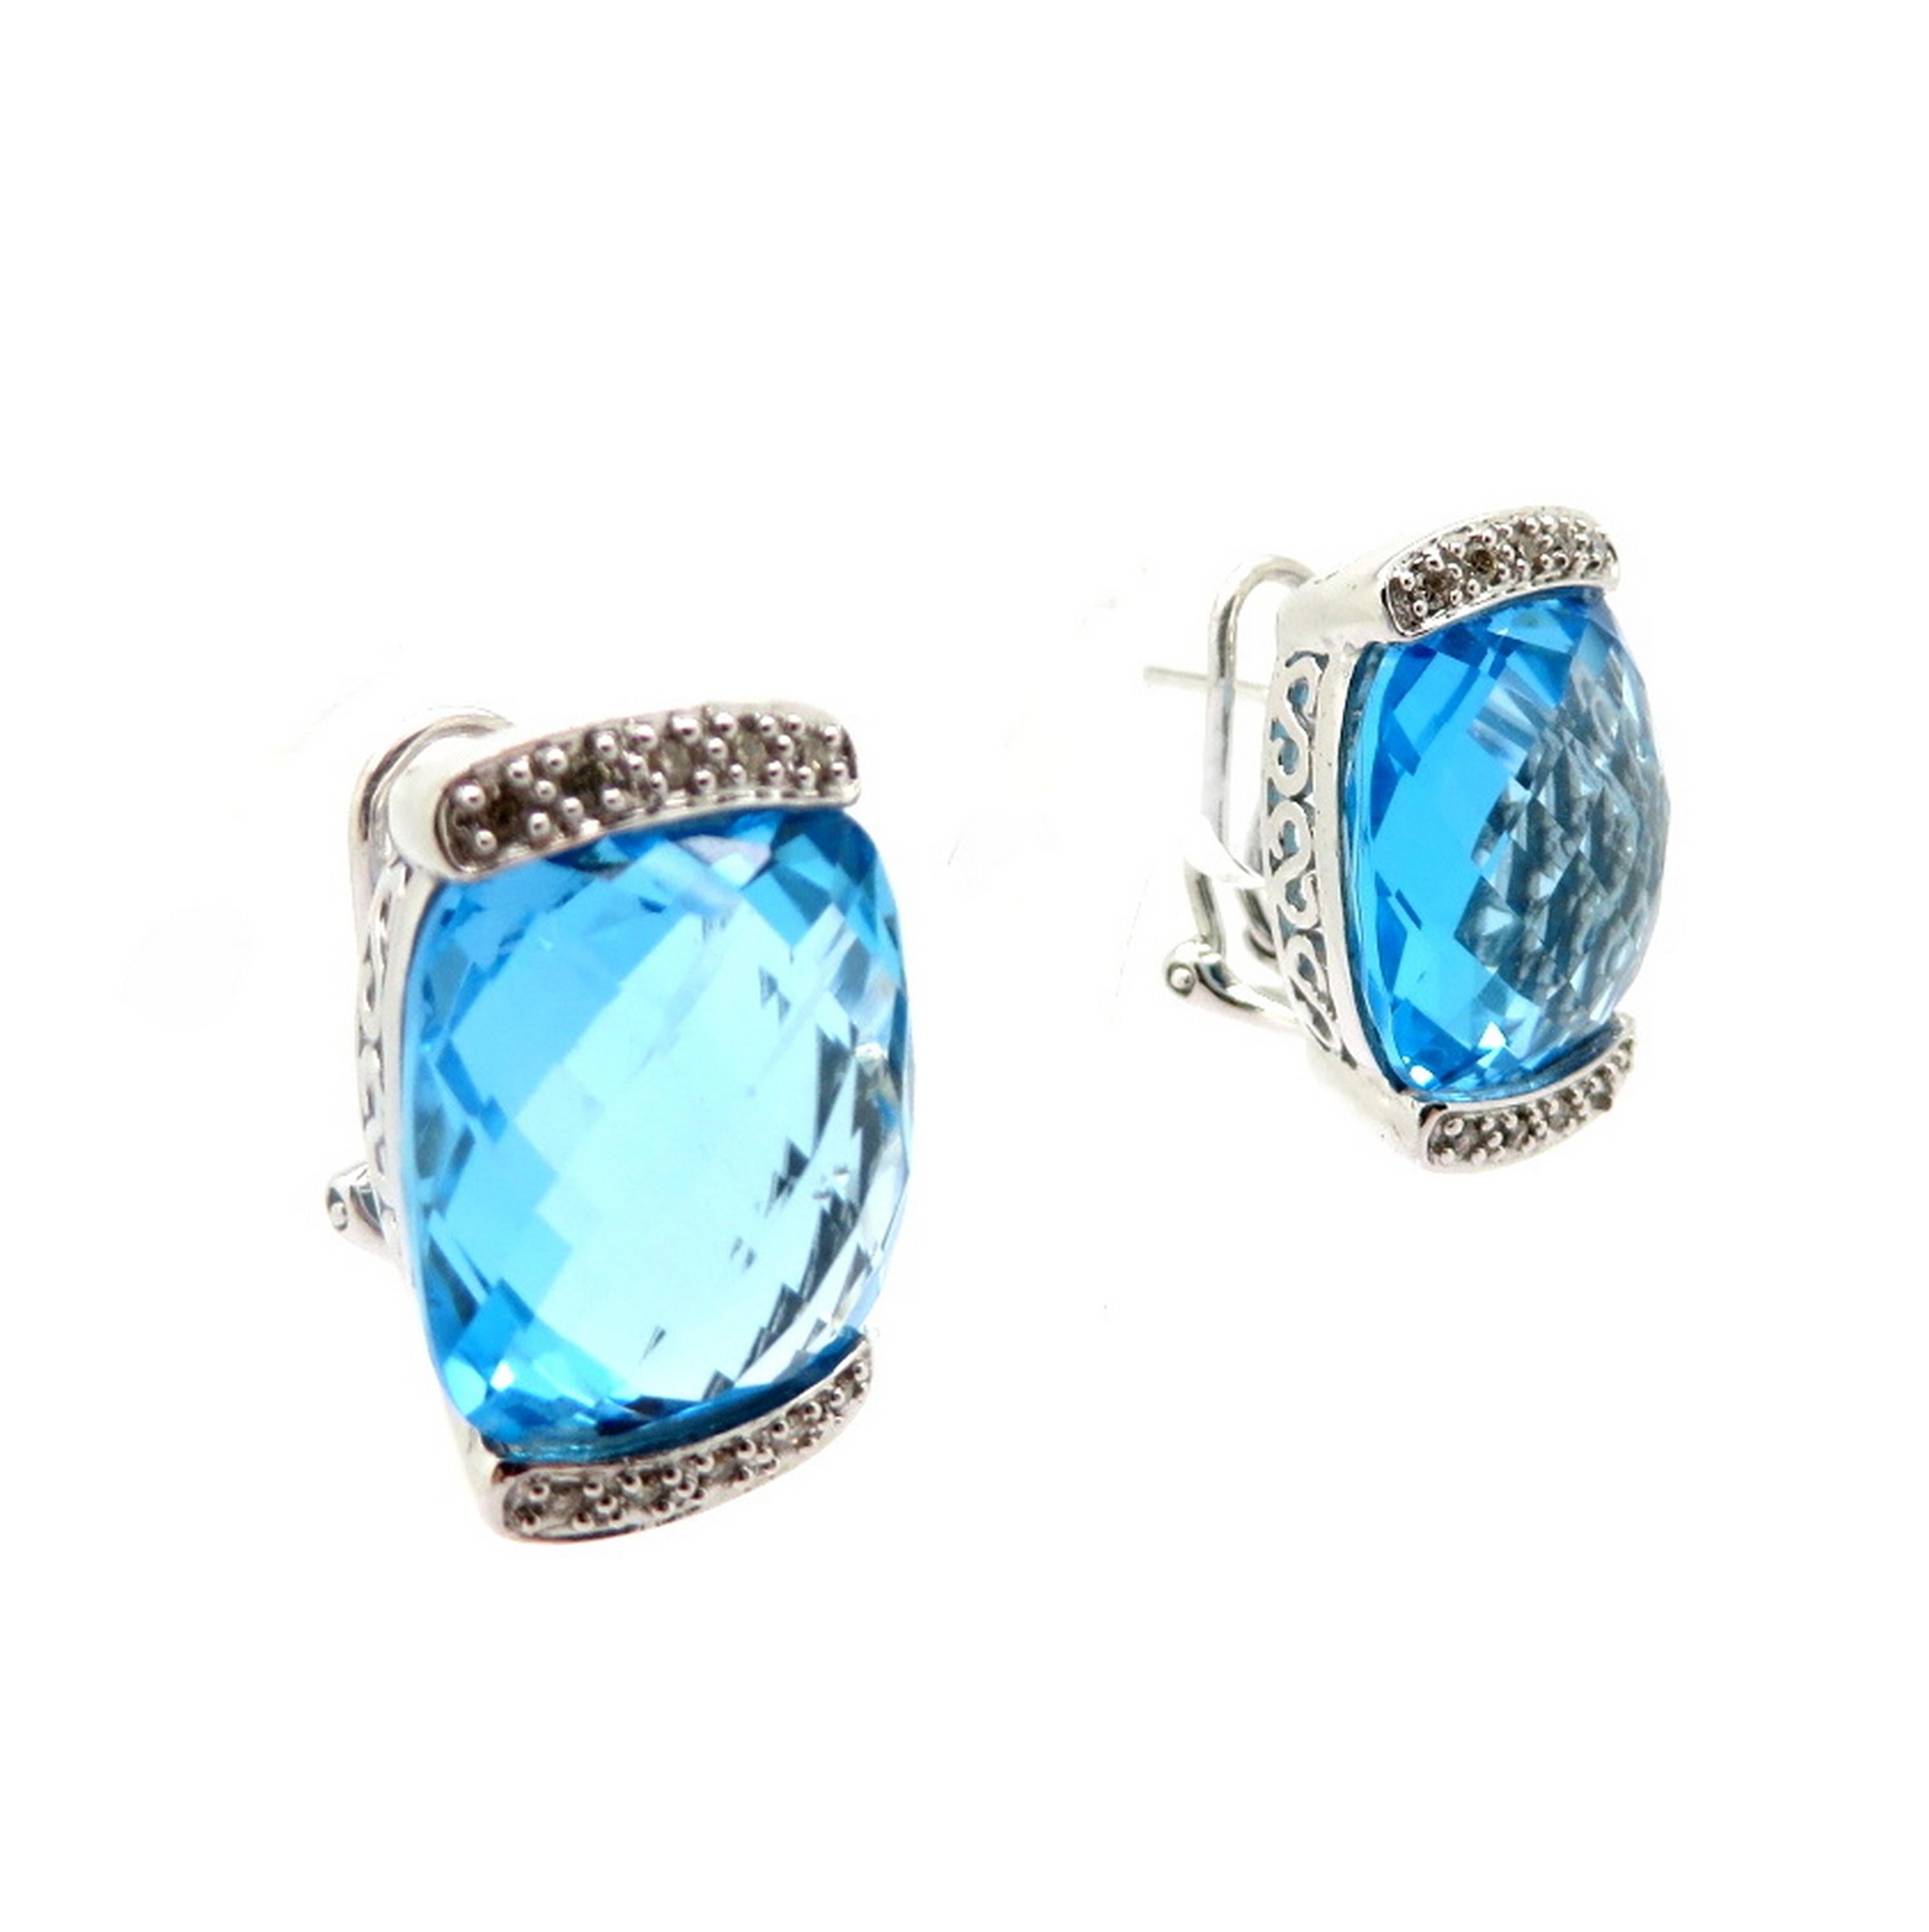 Estate 14 Karat Gold Large Blue Topaz and Diamond Fashion Statement Earrings In Excellent Condition For Sale In Scottsdale, AZ